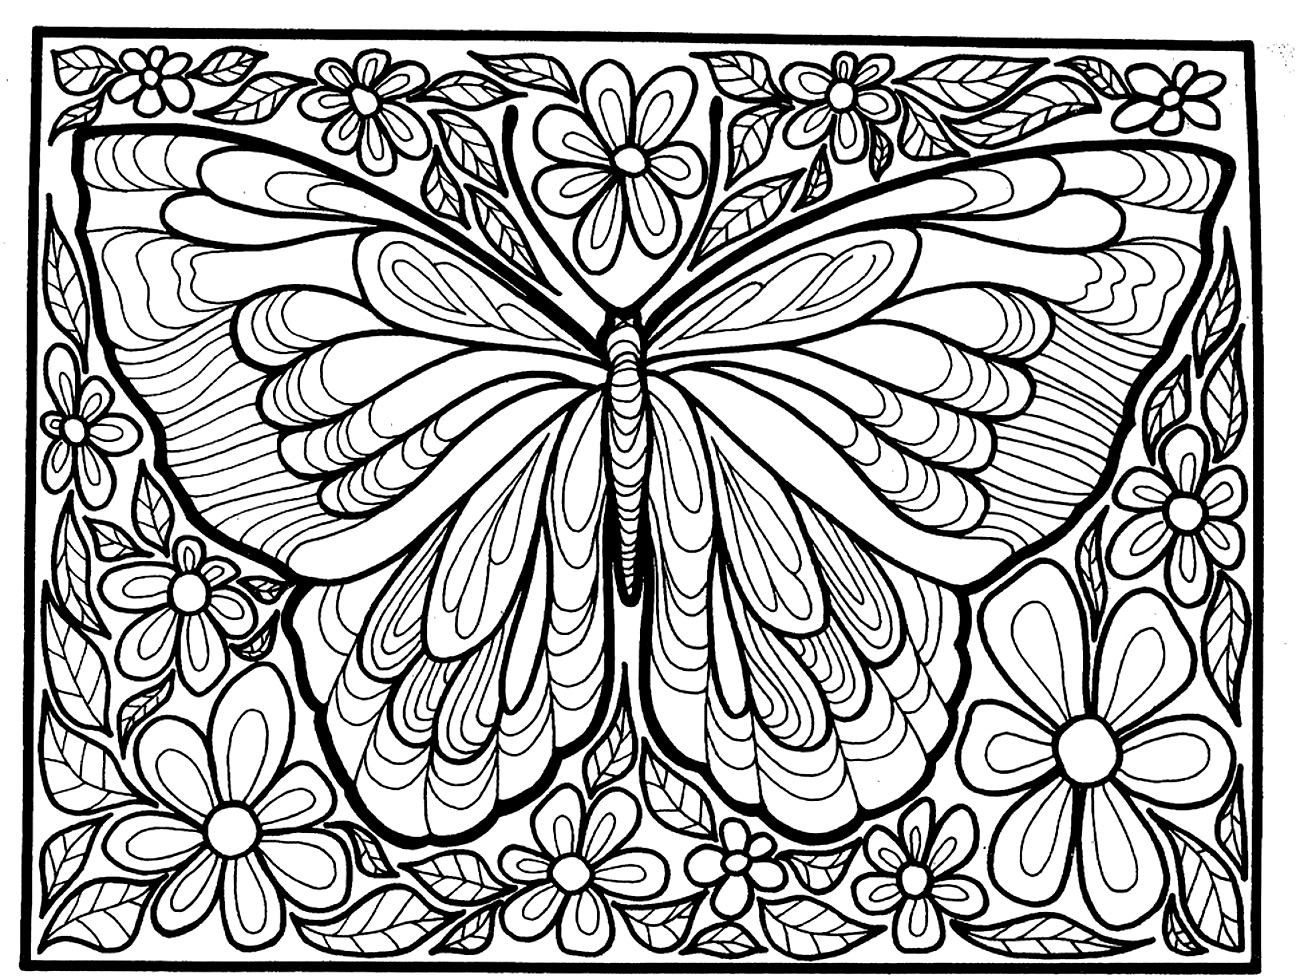 Big Coloring Pages For Adults
 Big butterfly Butterflies & insects Adult Coloring Pages